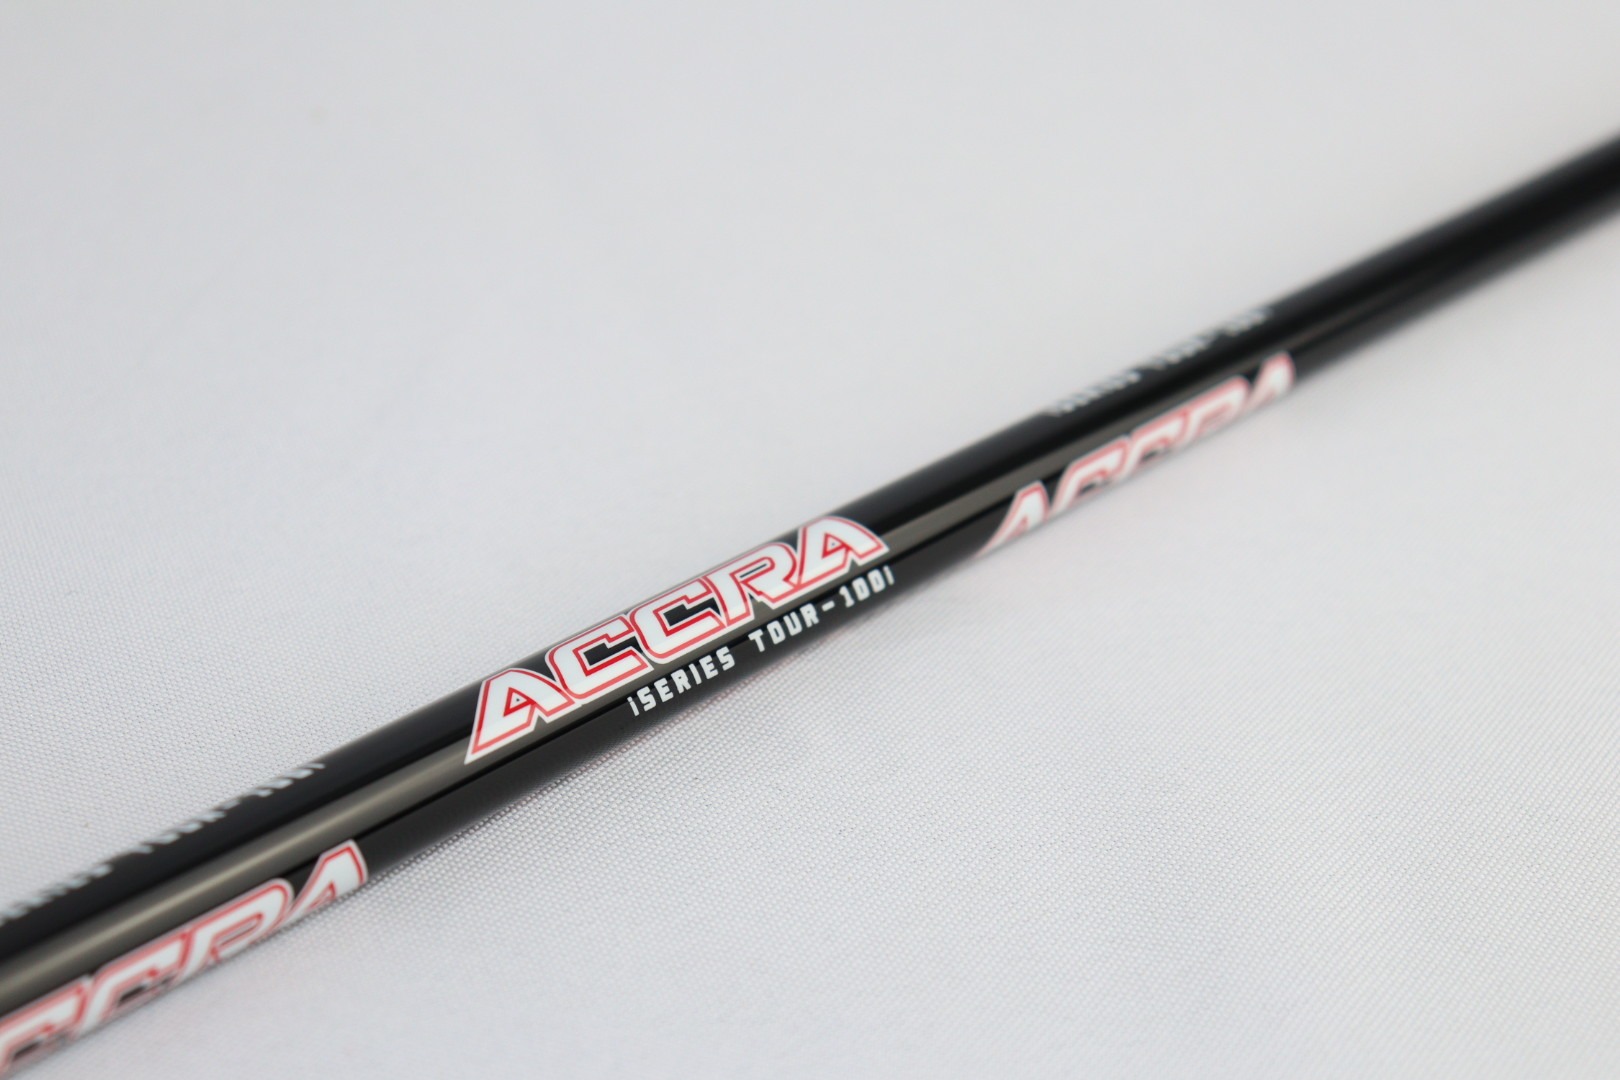 accra golf shafts on tour